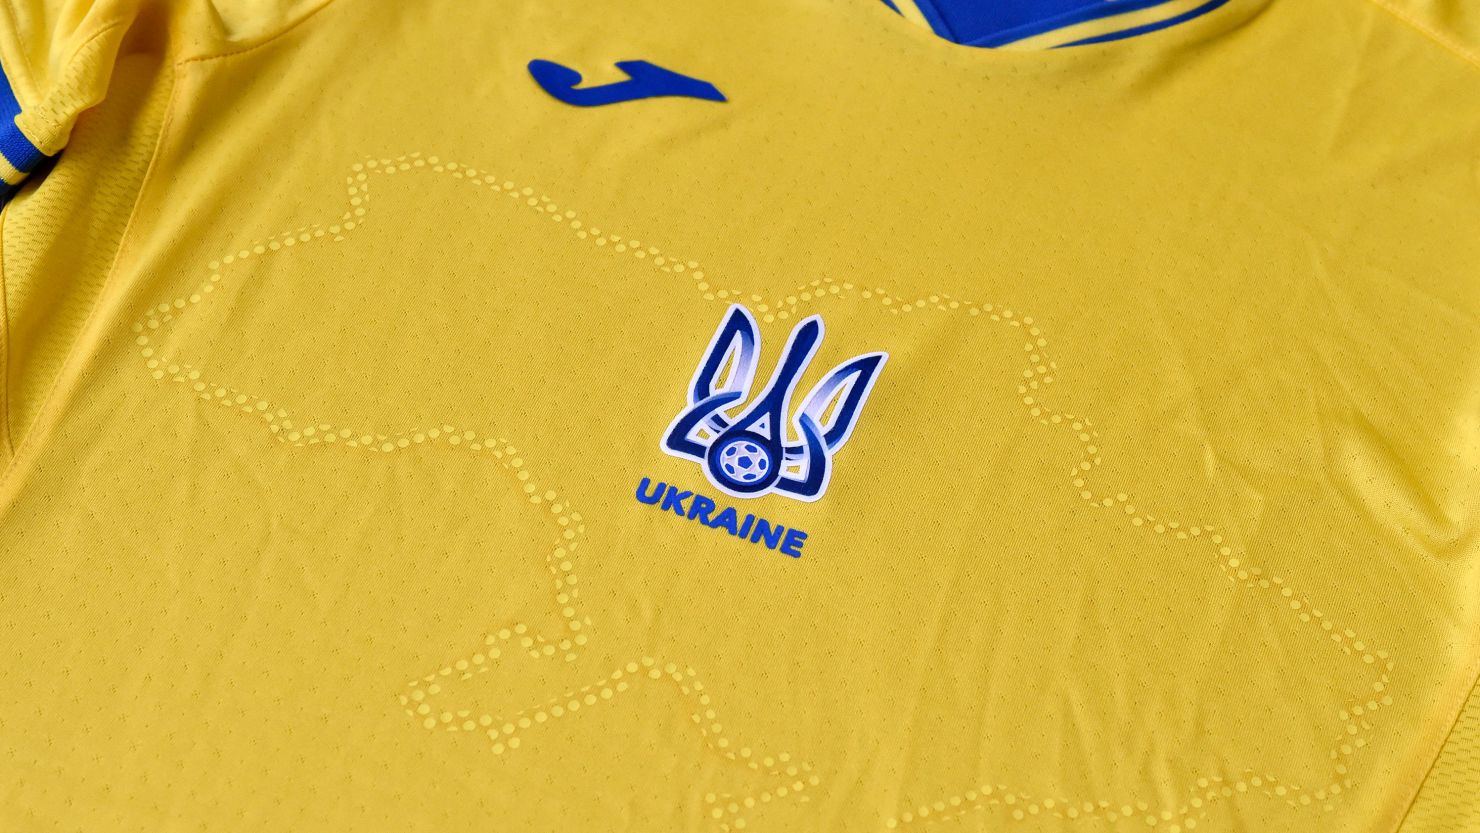 Ukraine's Euro 2020 kit features a map of the country that includes Russian-annexed Crimea.